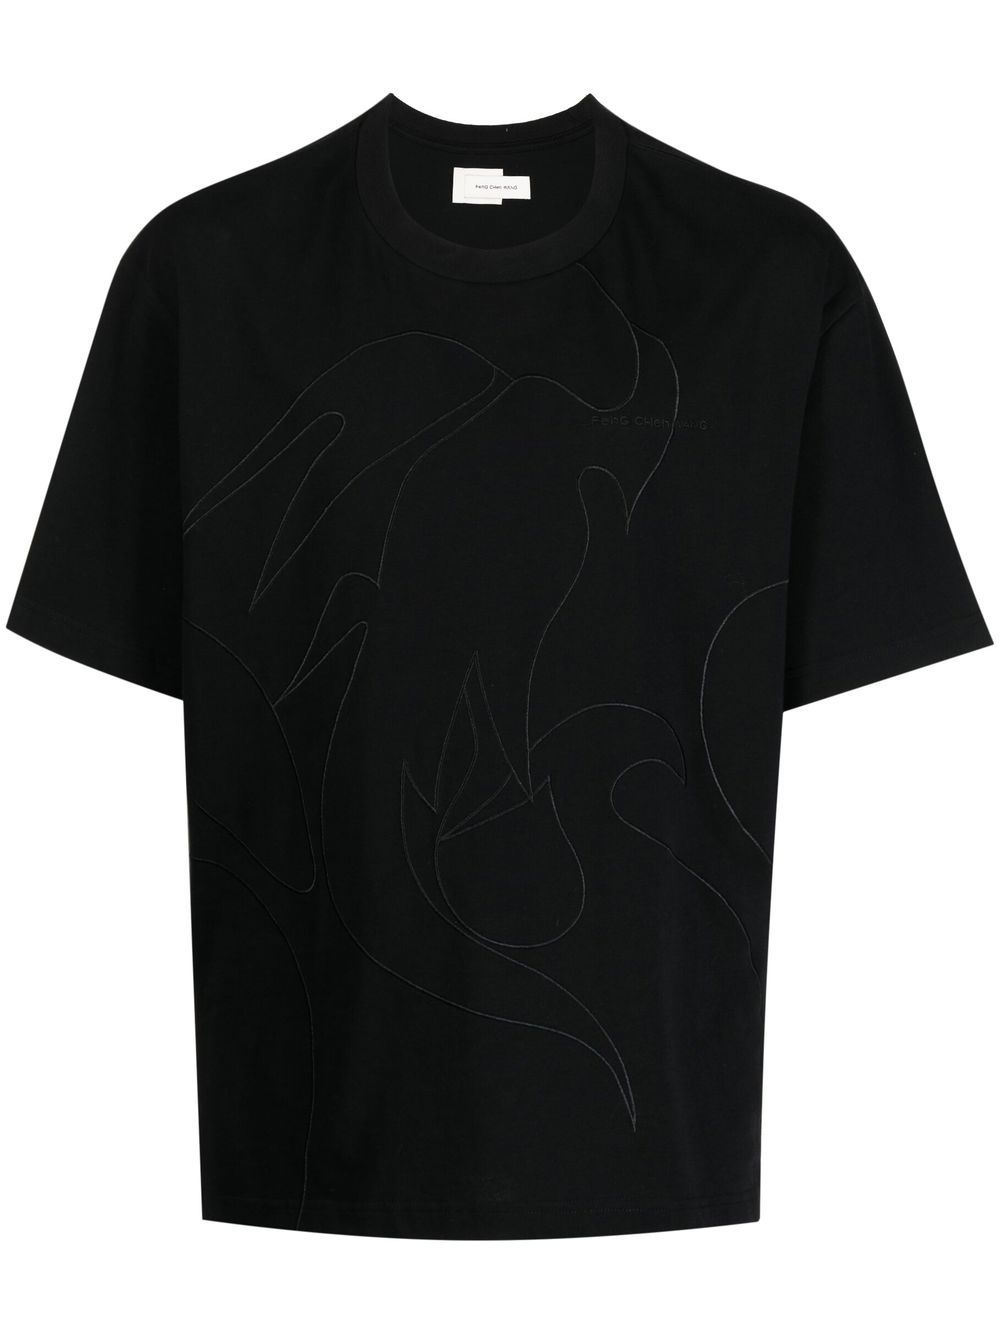 Phoenix embroidered T-shirt - 1